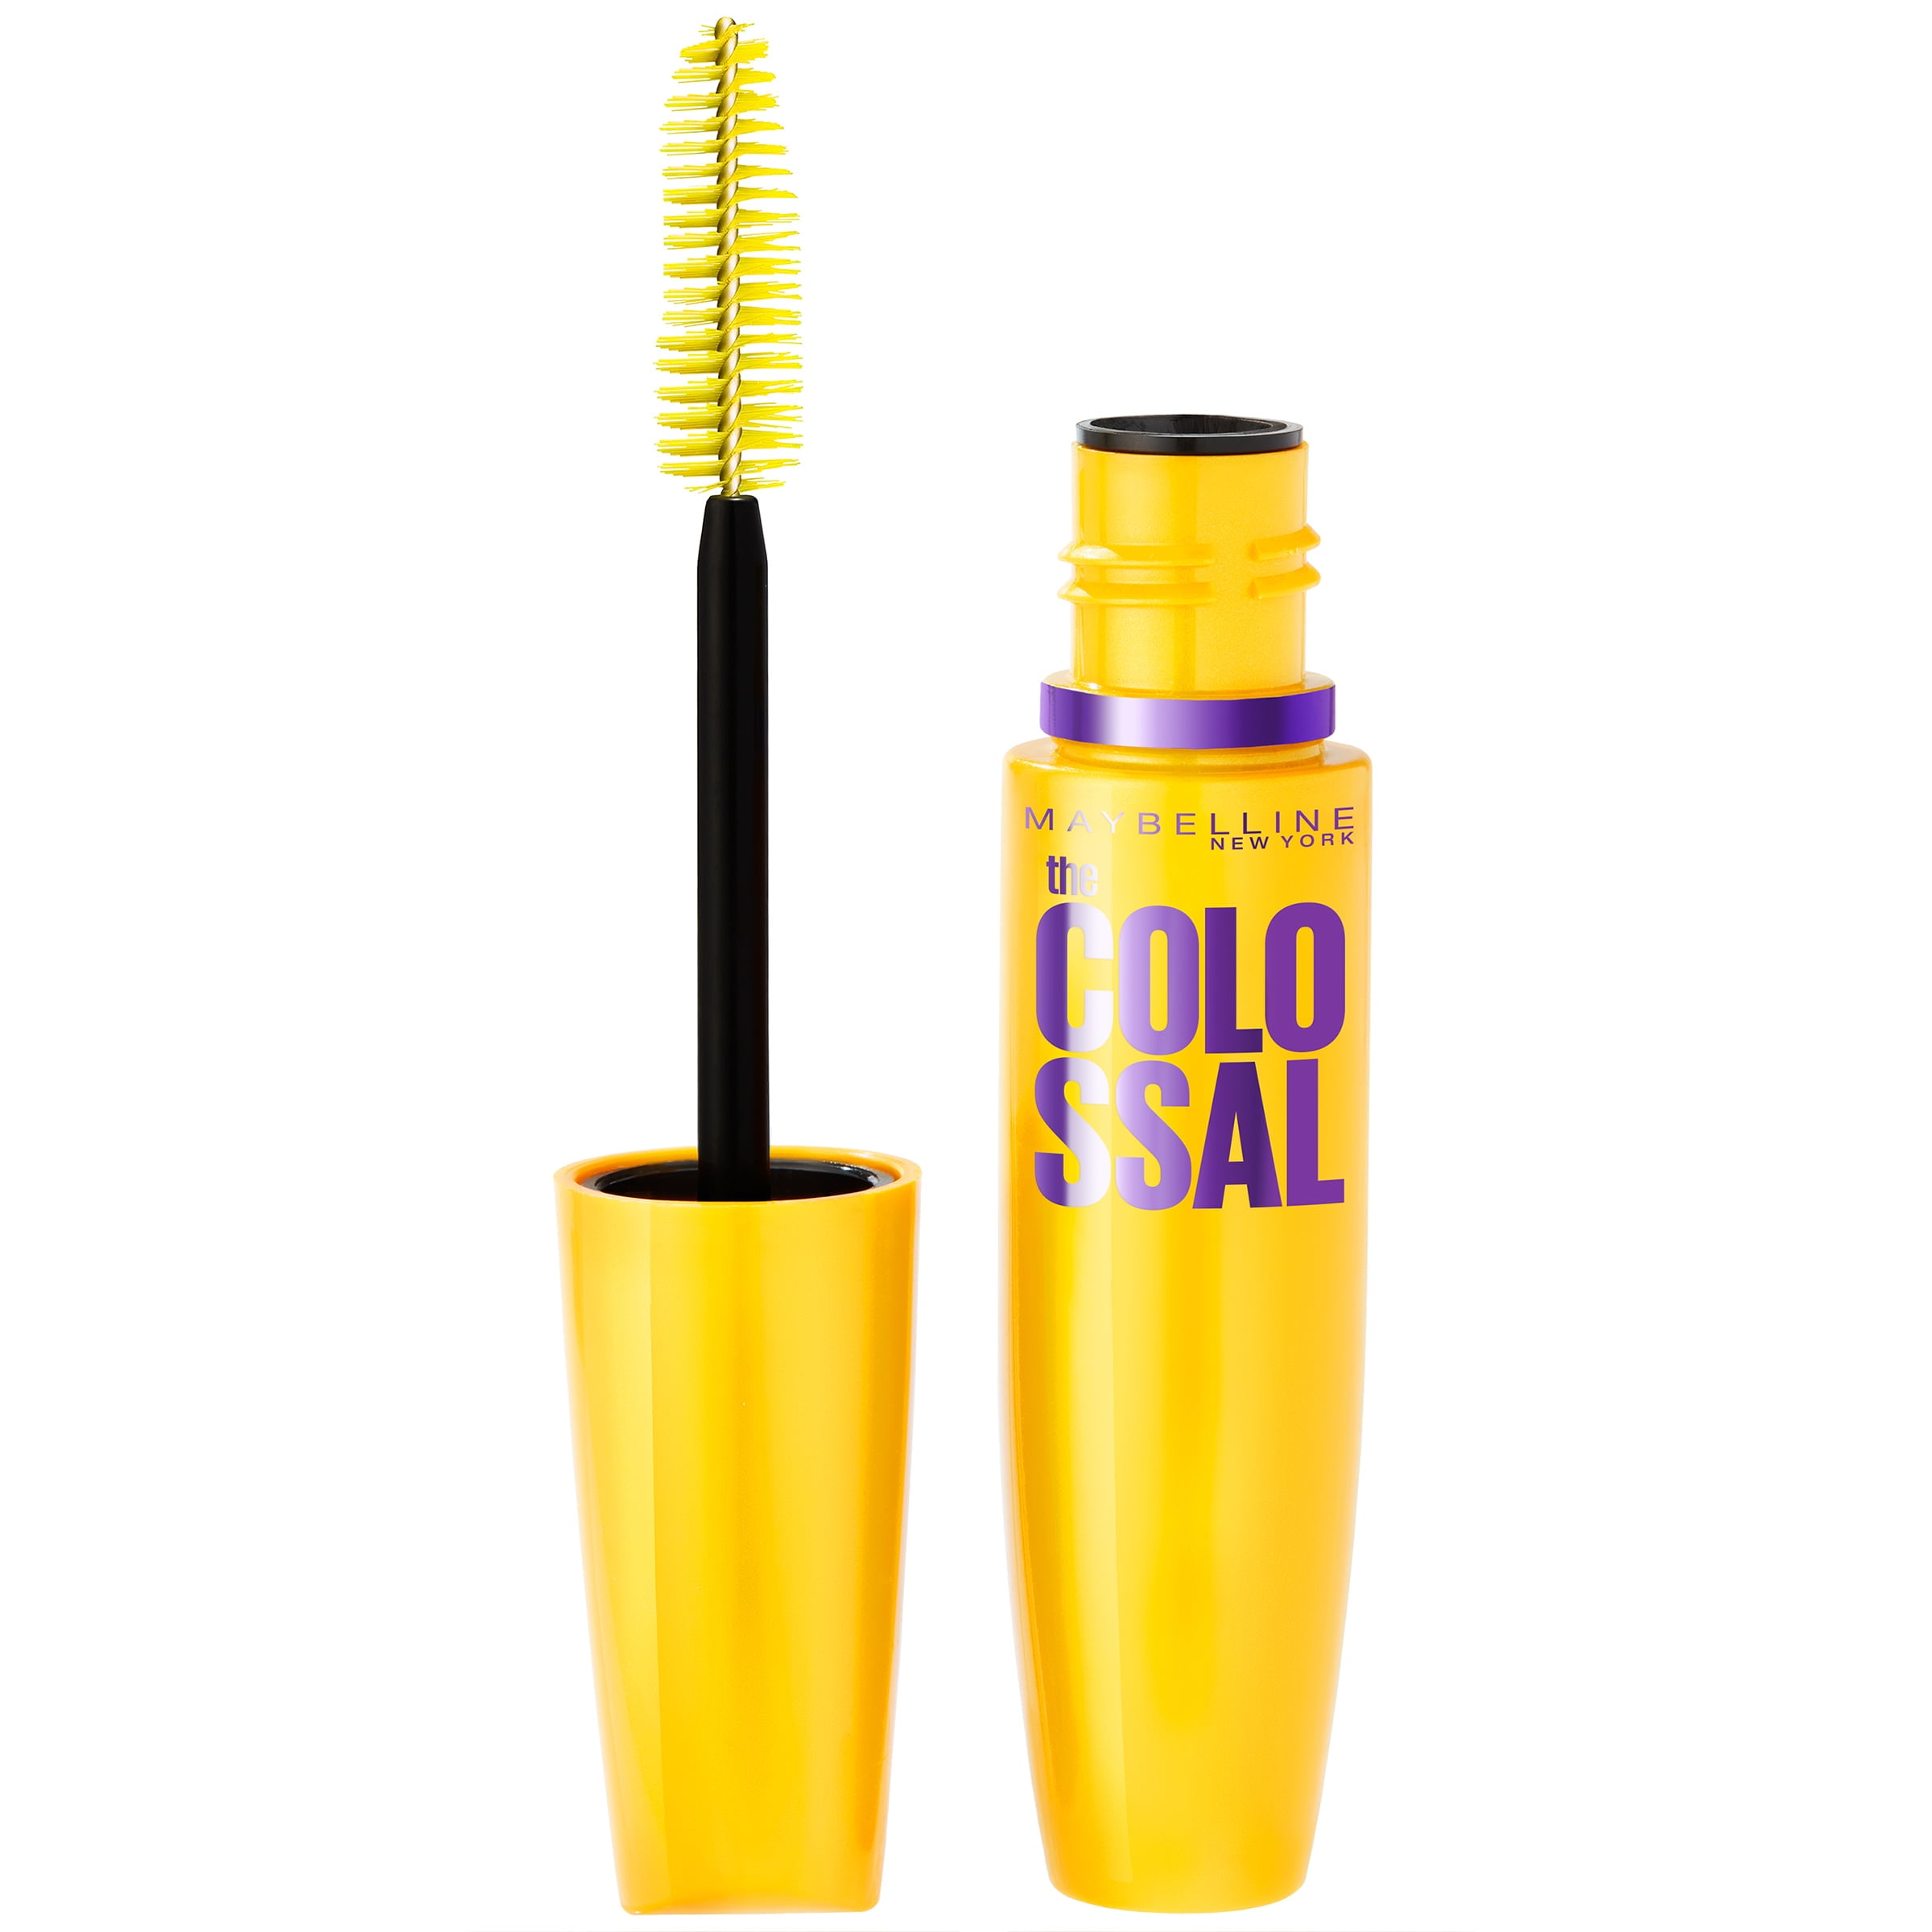 Maybelline Volum Express The Colossal Mascara, Classic Black